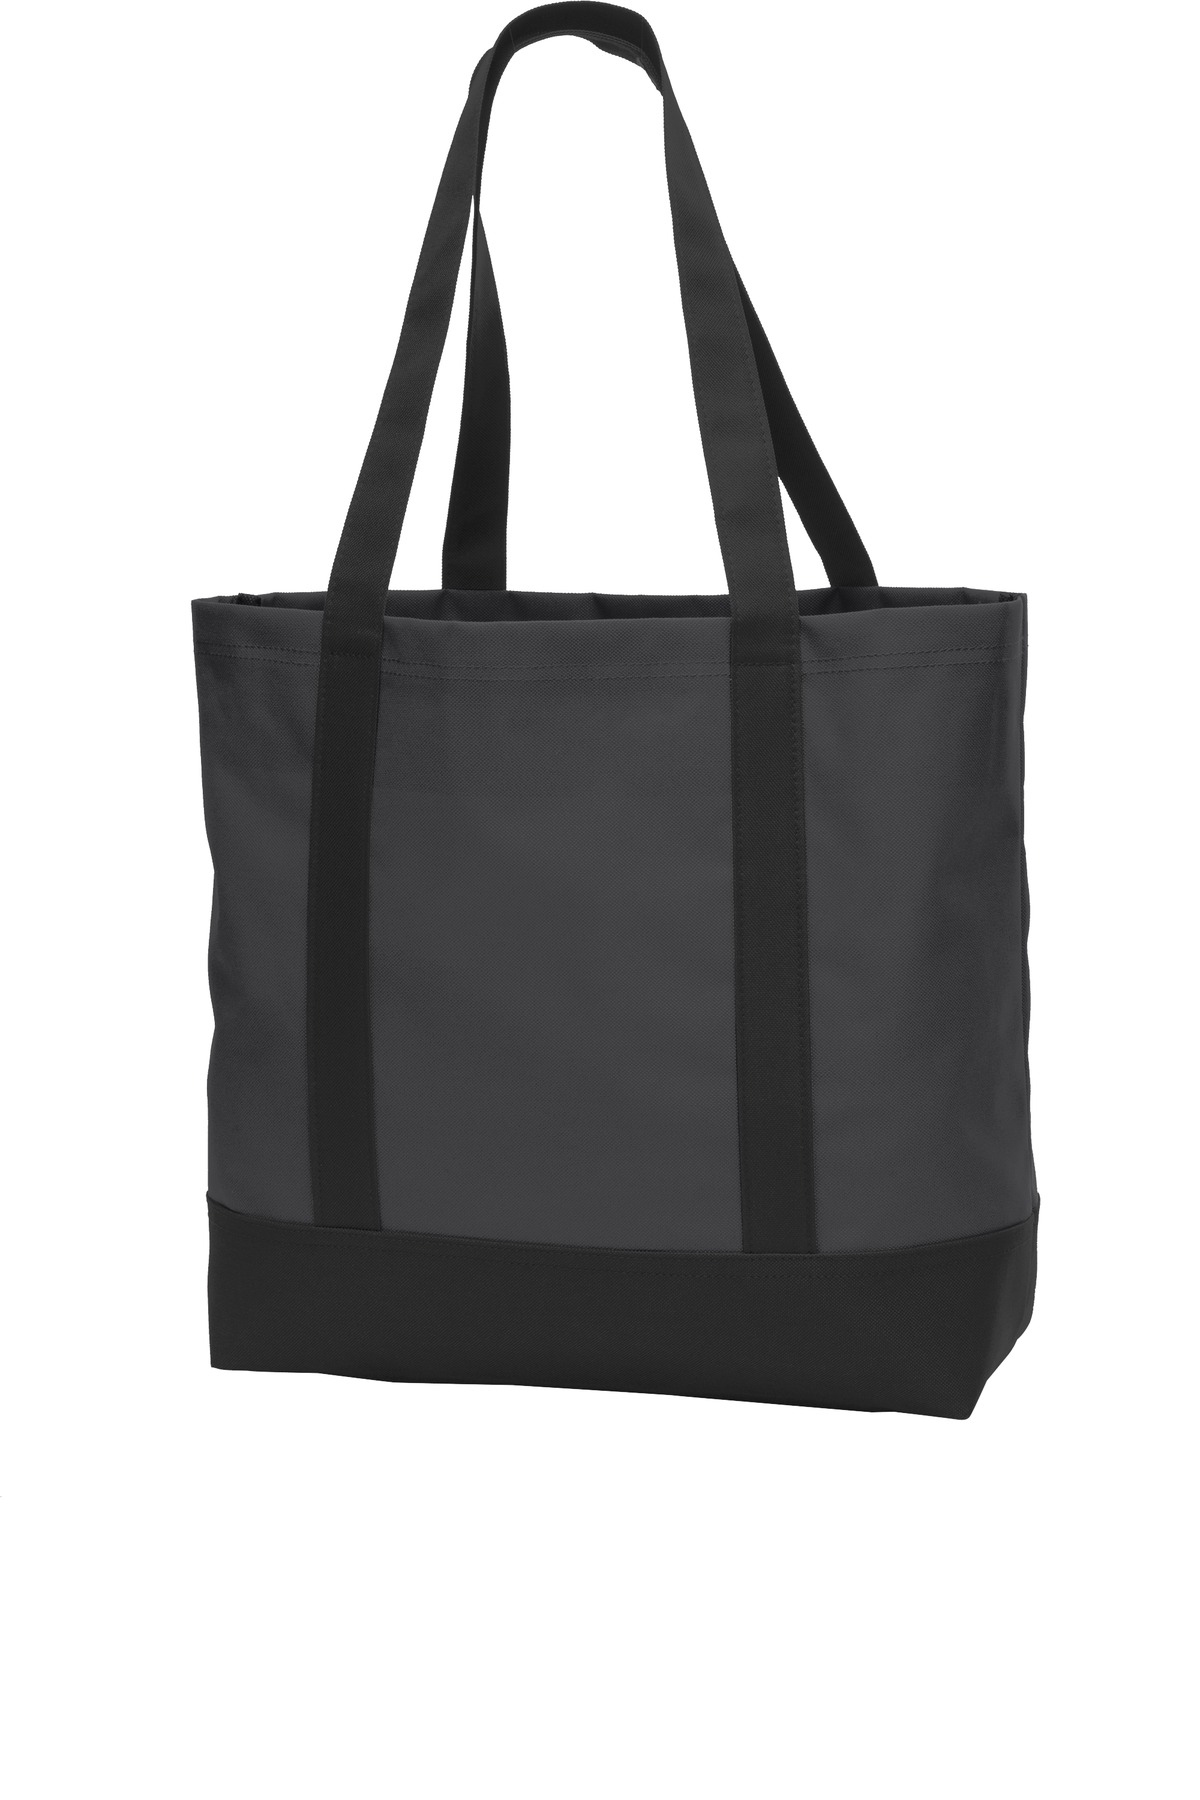 Port Authority Day Tote | Product | SanMar